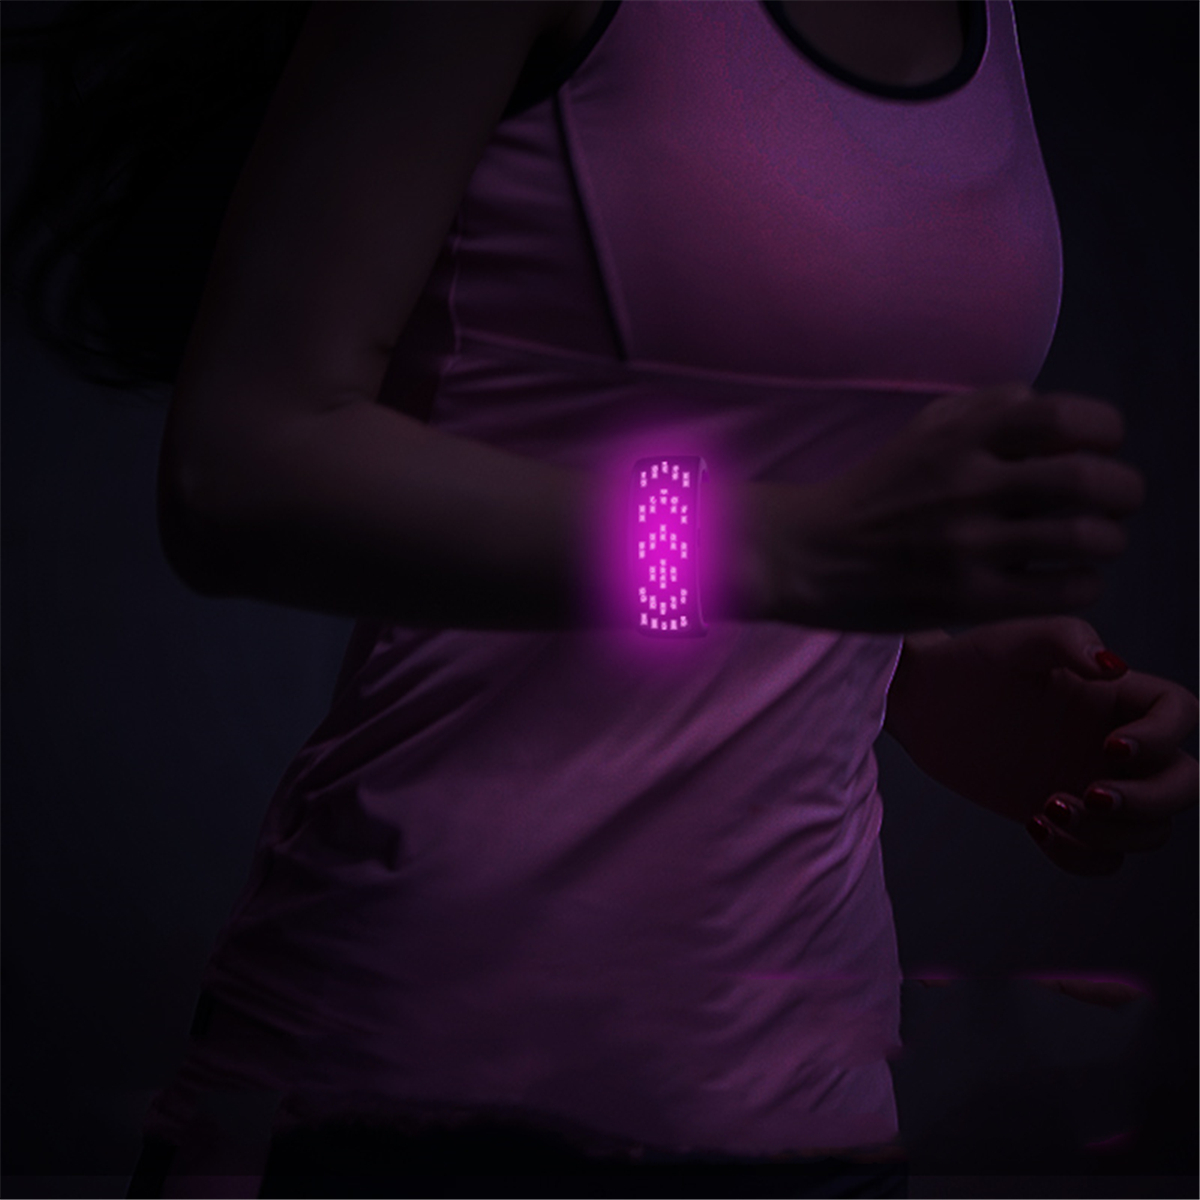 Cheering-Colorful-Display-Dynamic-LED-Luminous-Bracelet-Night-Running-Concert-Party-Props-Bracelet-1652102-5